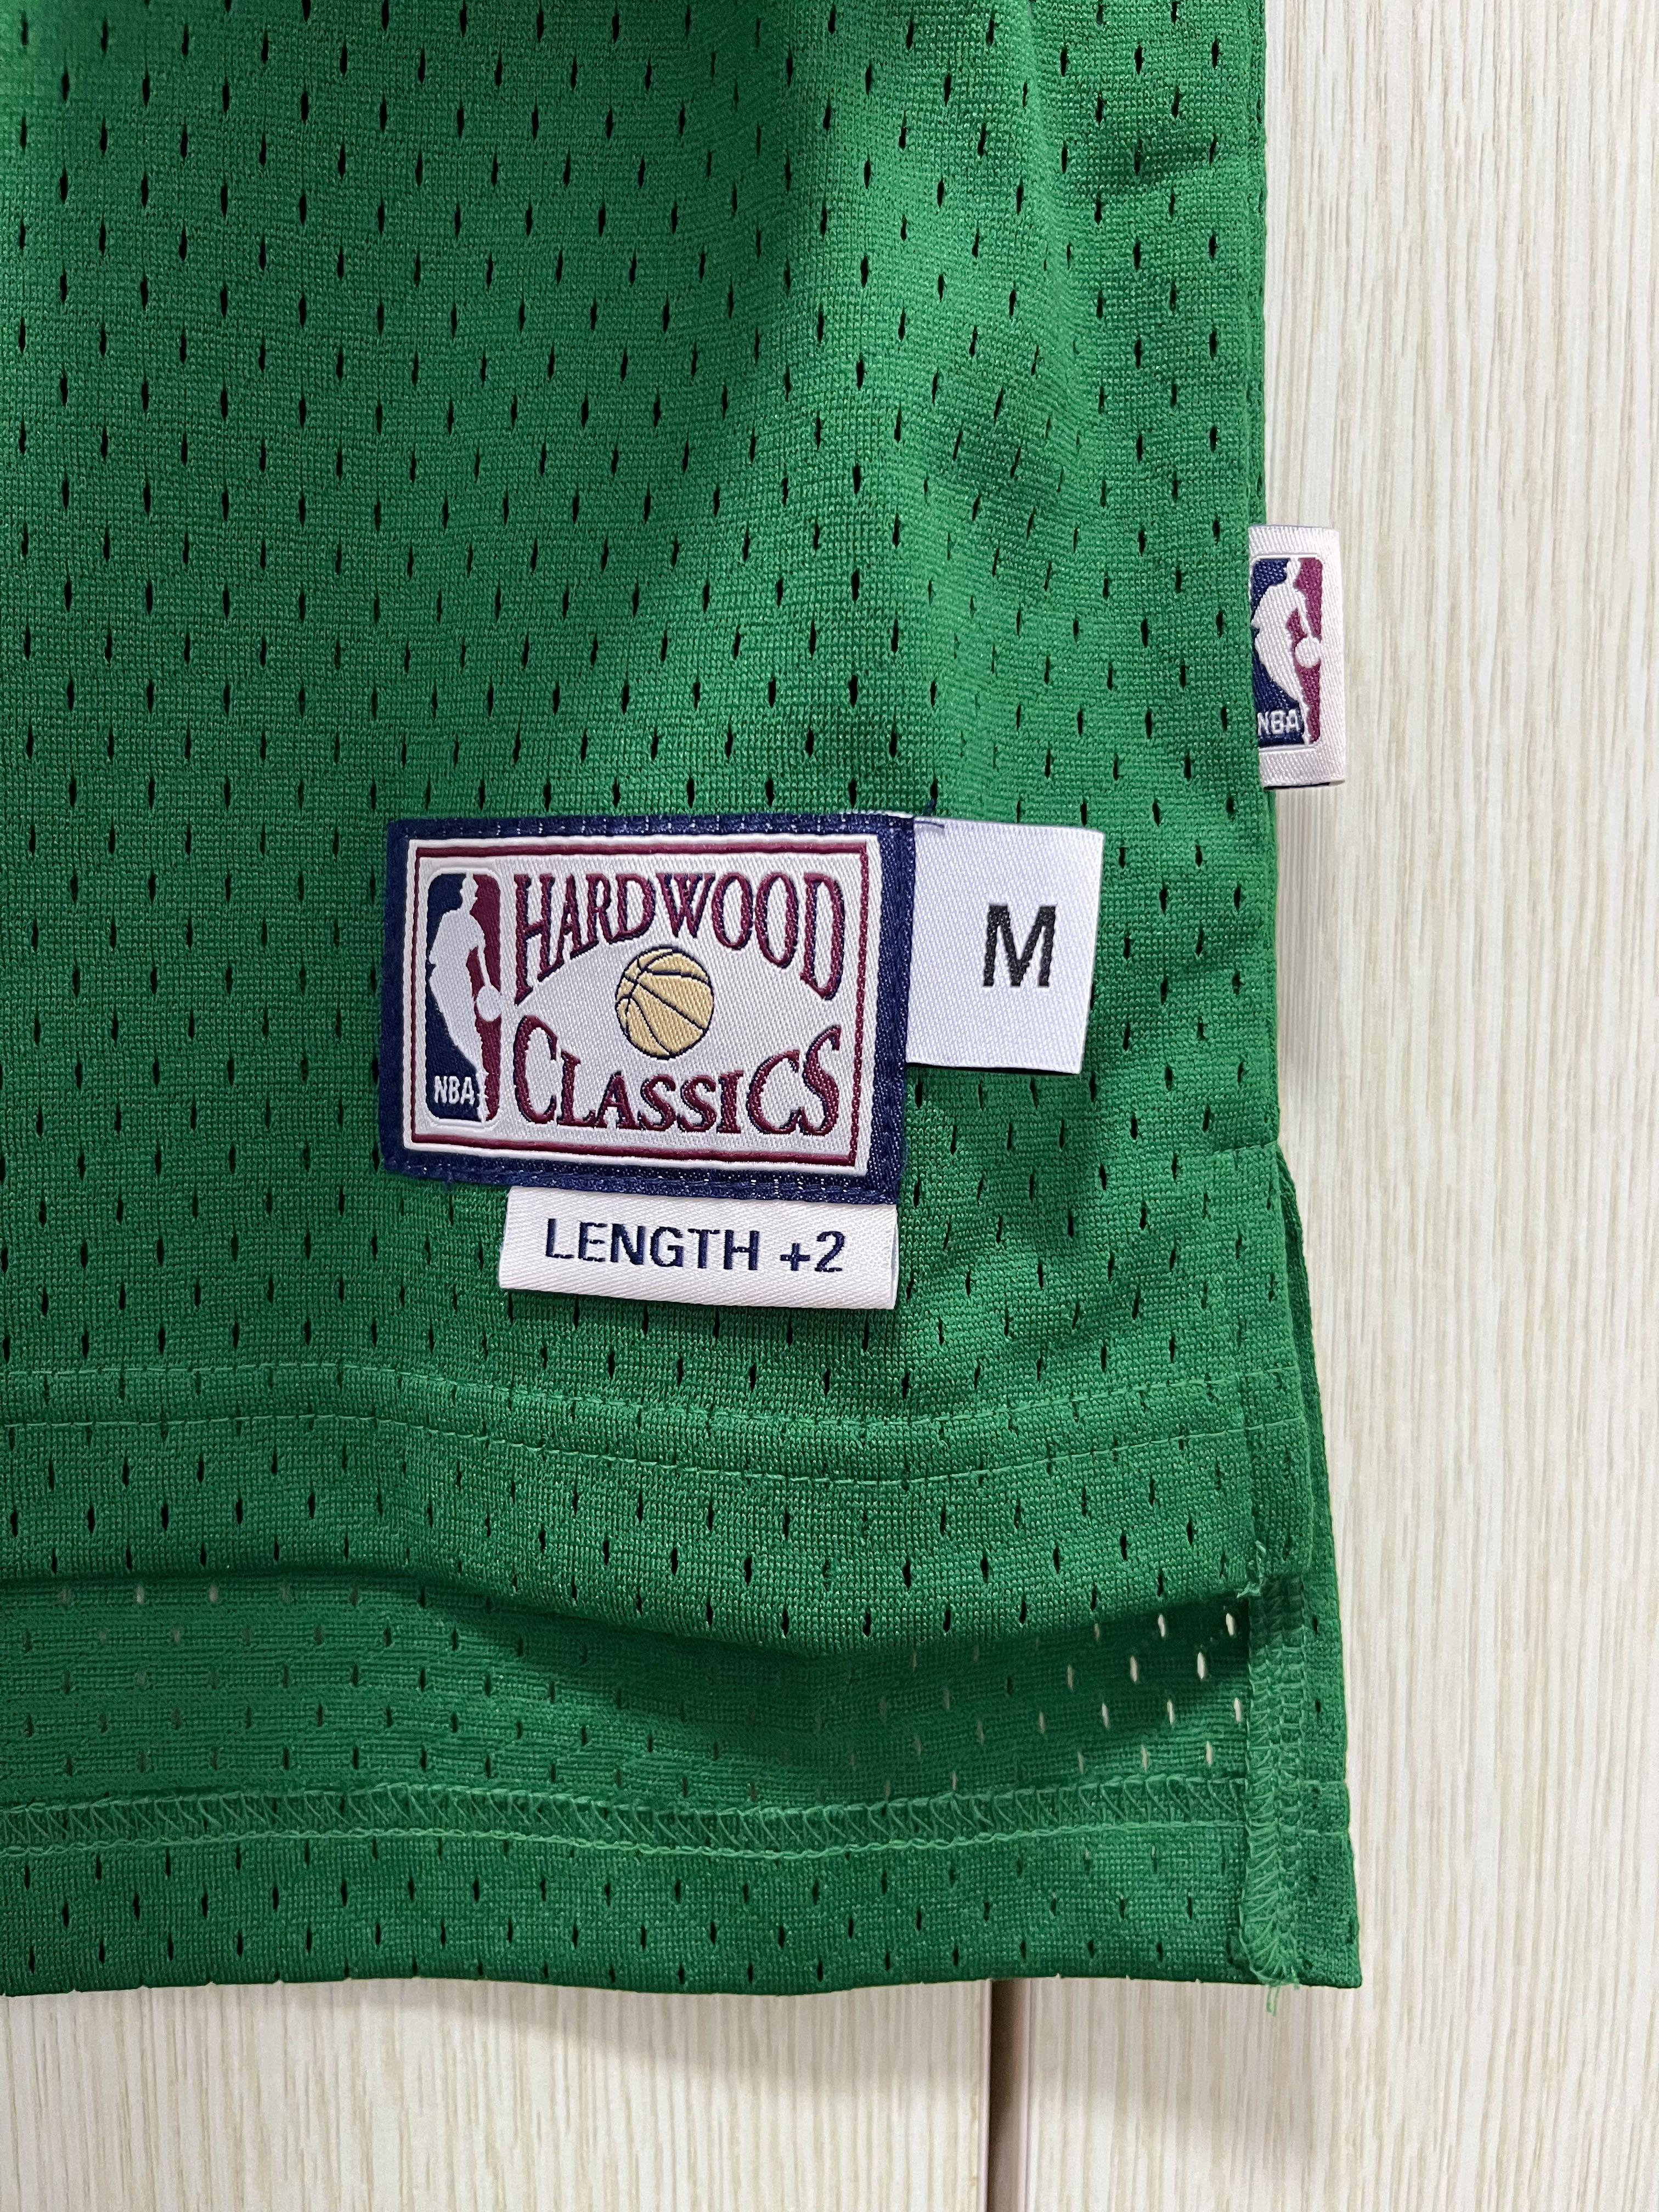 Men's Celtics Bill Russell Patch Collection Jersey - All Stitched